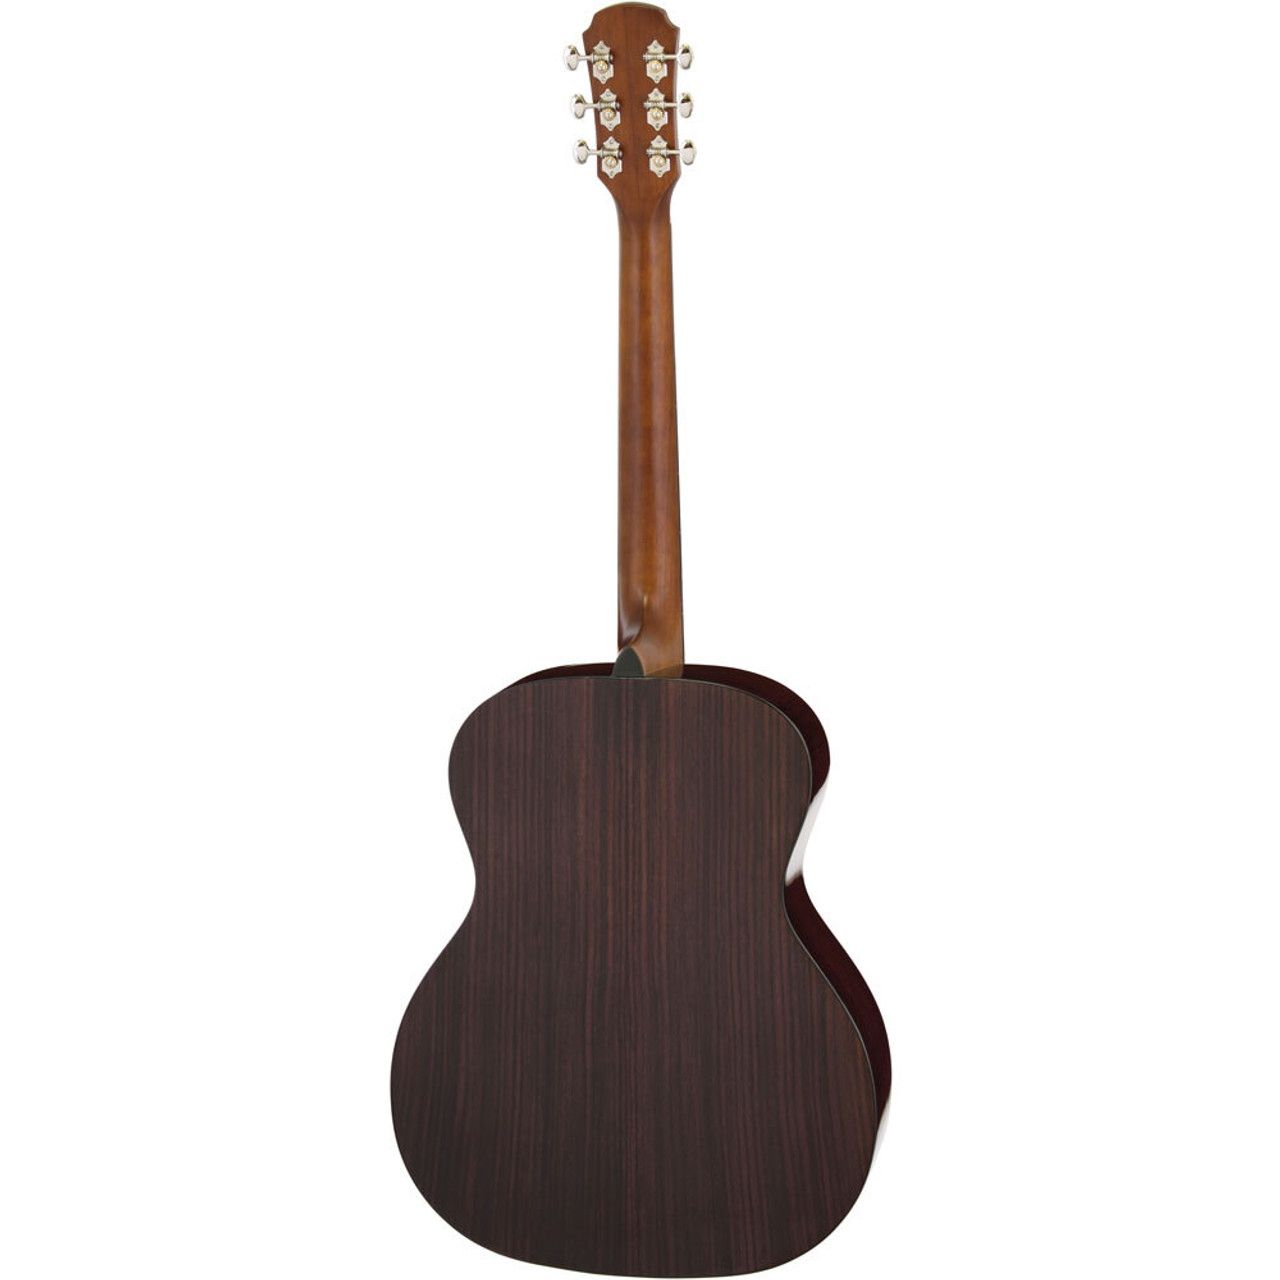 Aria 200 Series Orchestral Body Acoustic Guitar in Natural Gloss